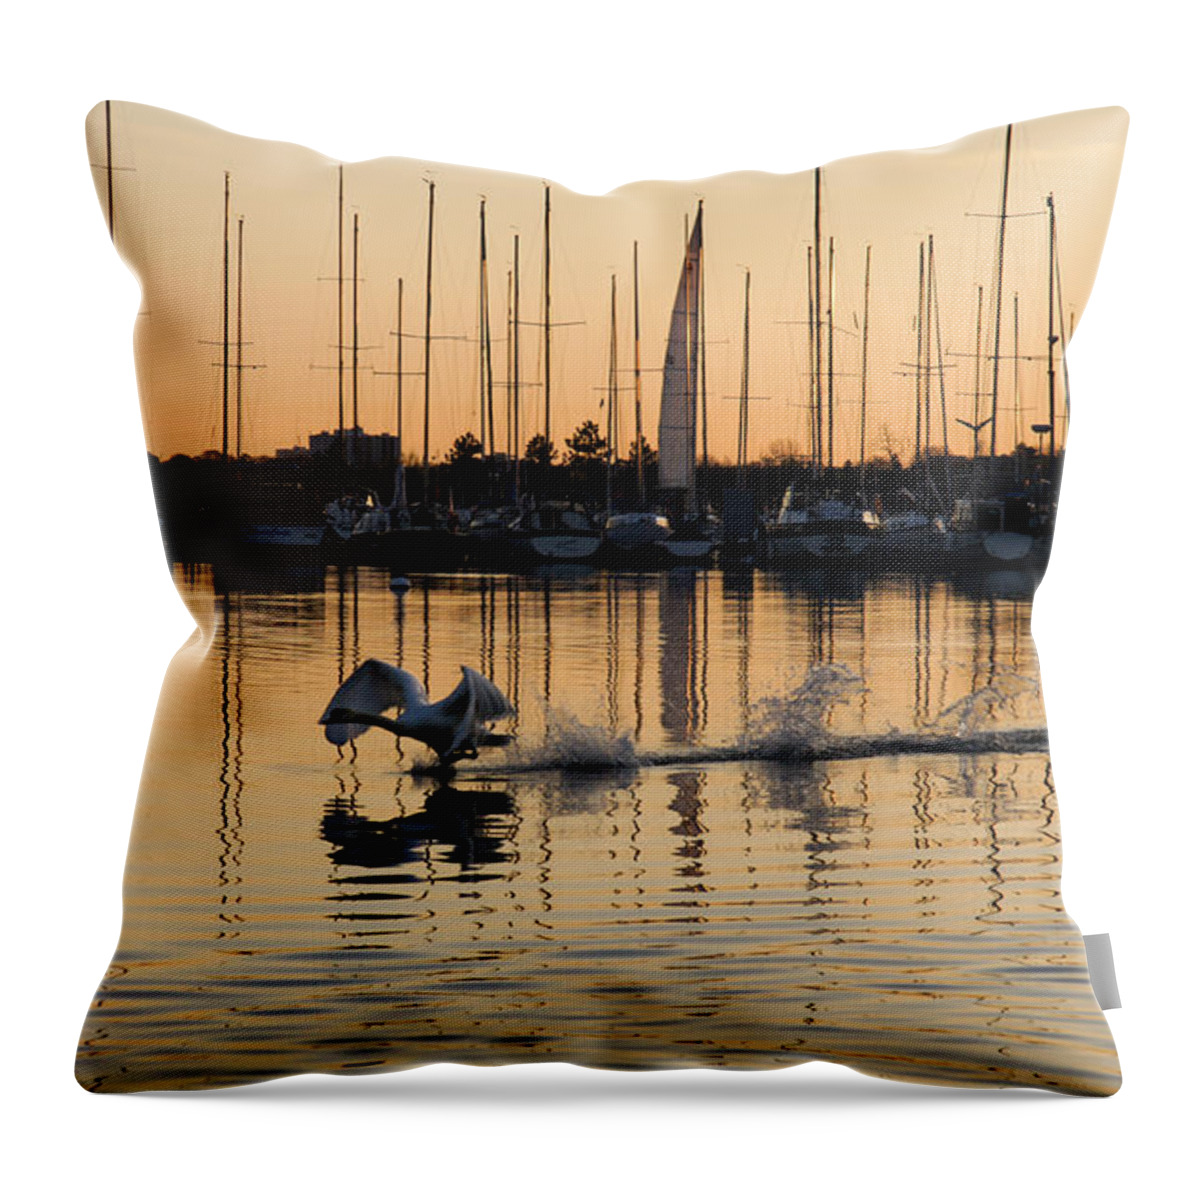 Takeoff Throw Pillow featuring the photograph The Golden Takeoff - Swan Sunset and Yachts at a Marina in Toronto Canada by Georgia Mizuleva